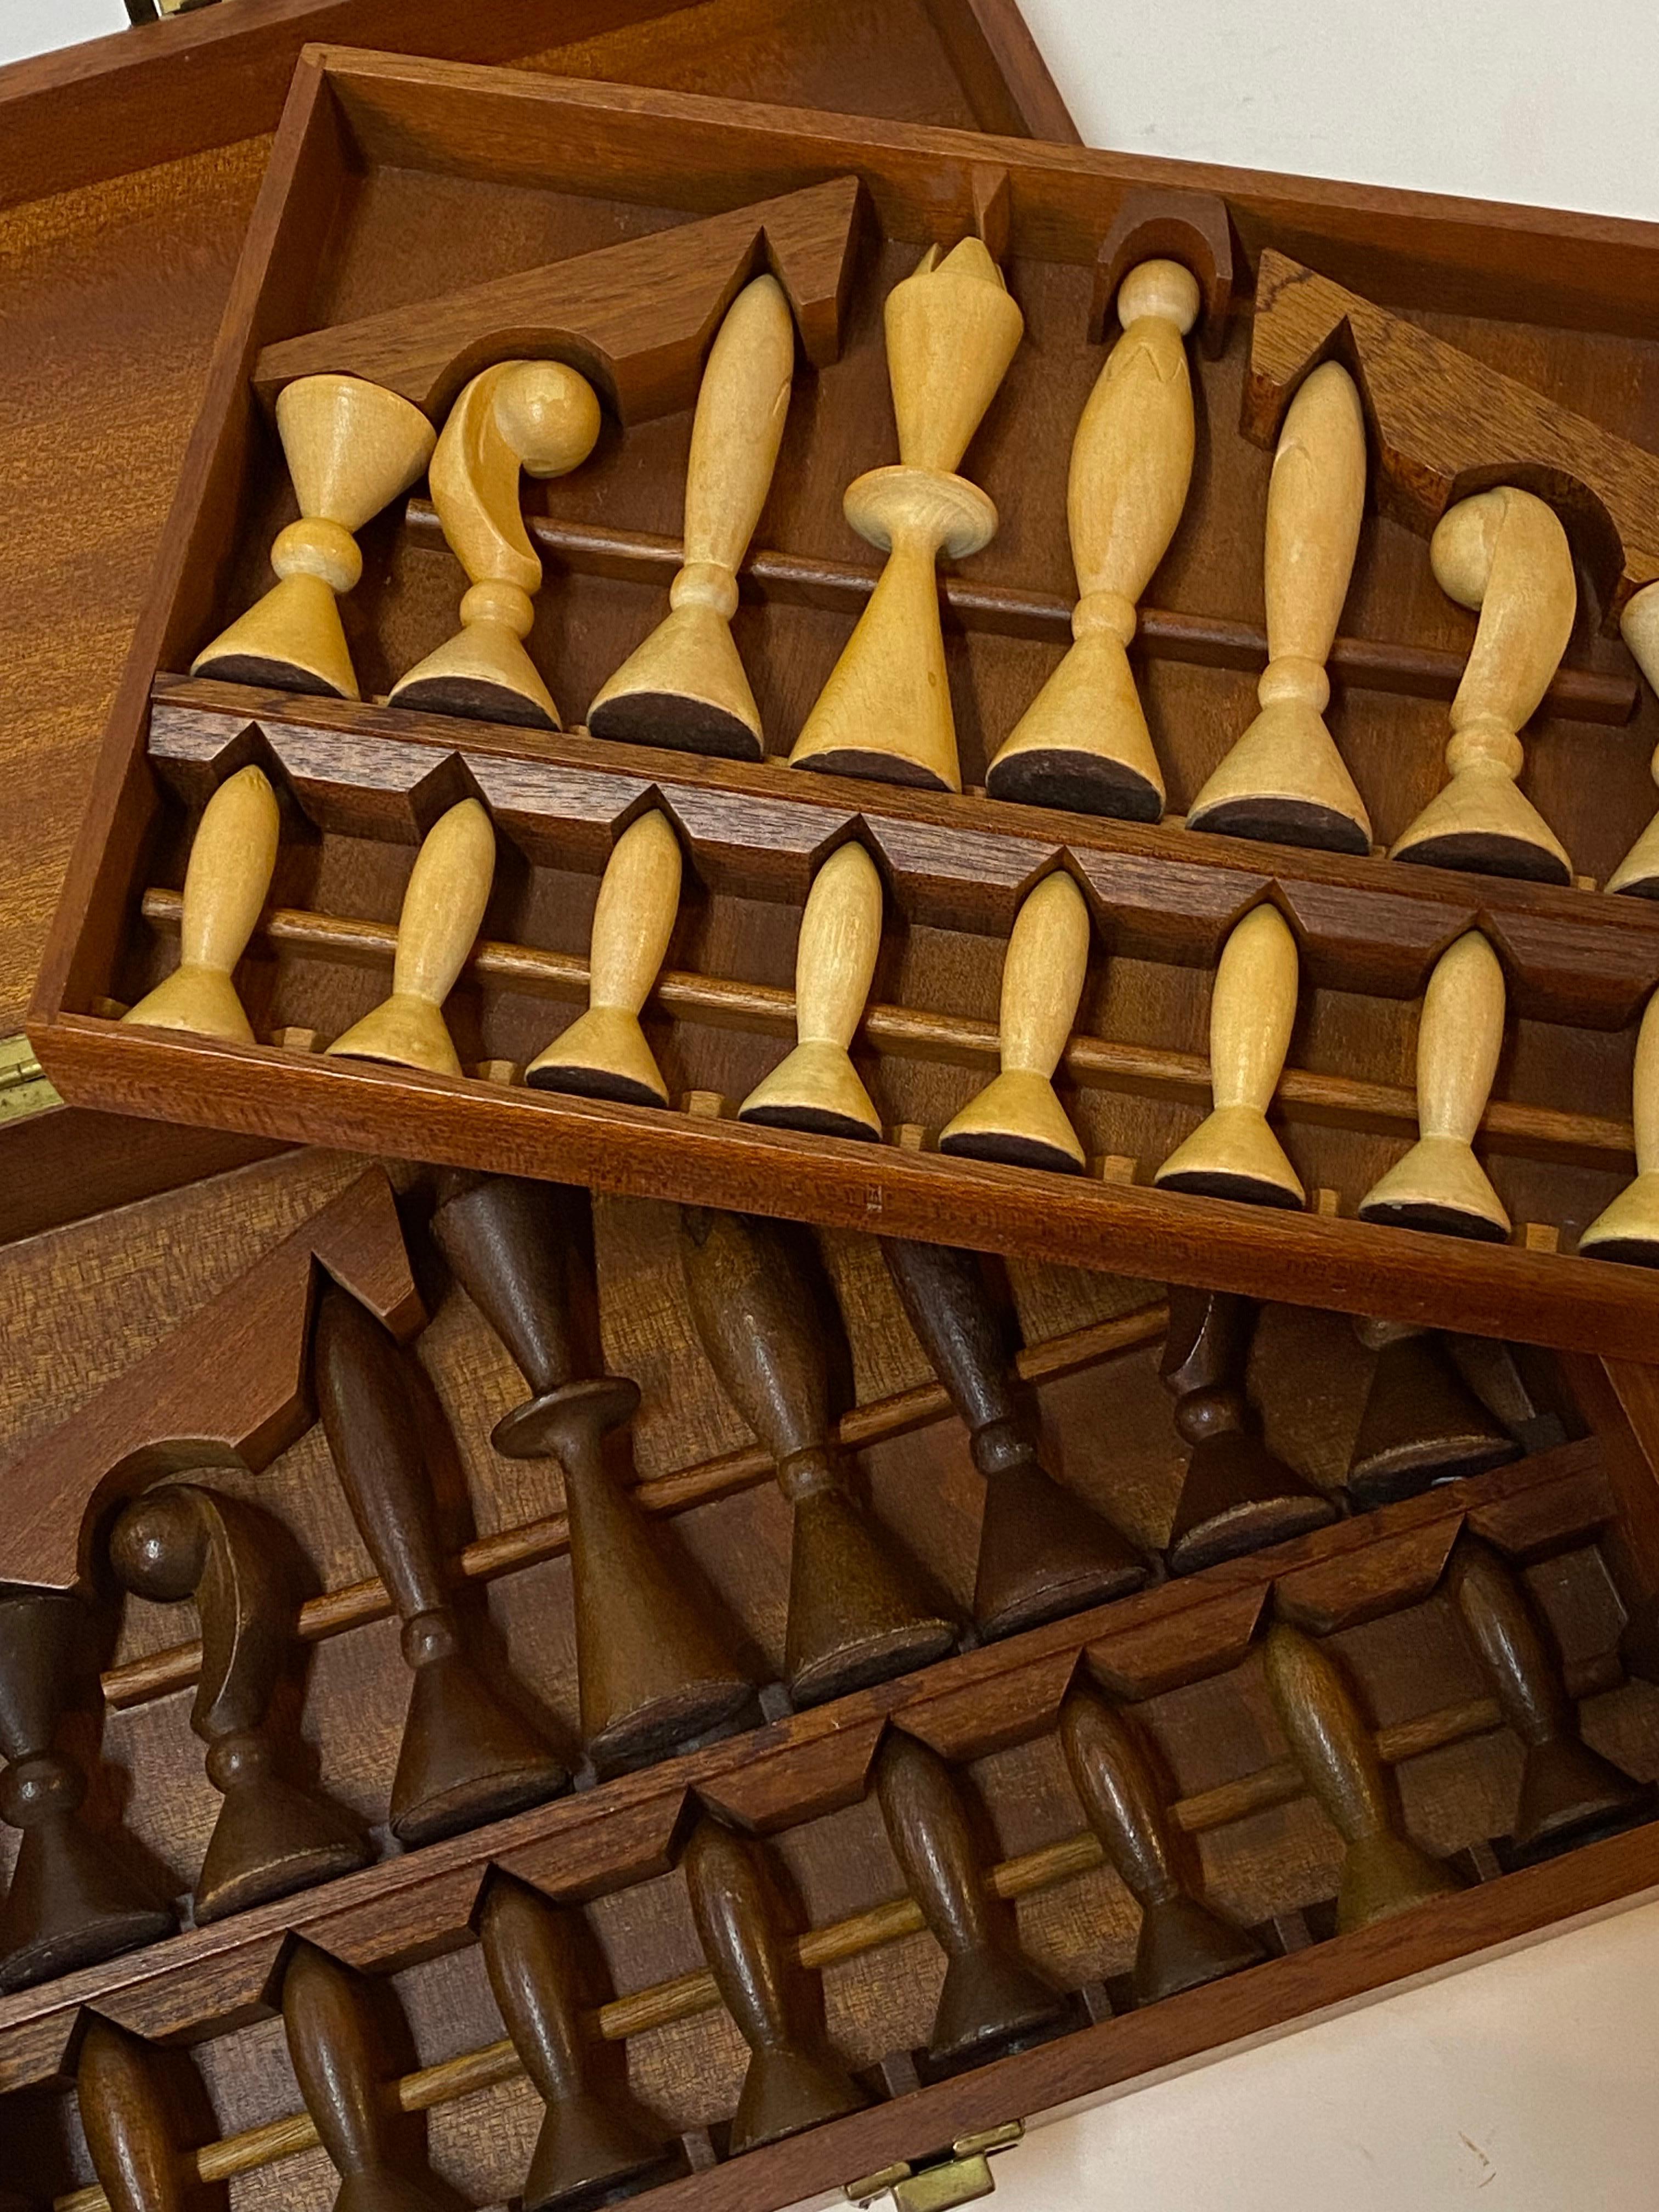 A fine boxed set of carved wood modernist chessmen. The two sets are made of hardwood and sculpturally carved into very stylized forms. One set is in a blonde wood natural finish and the other set is a brown walnut. All pieces are present. Circa